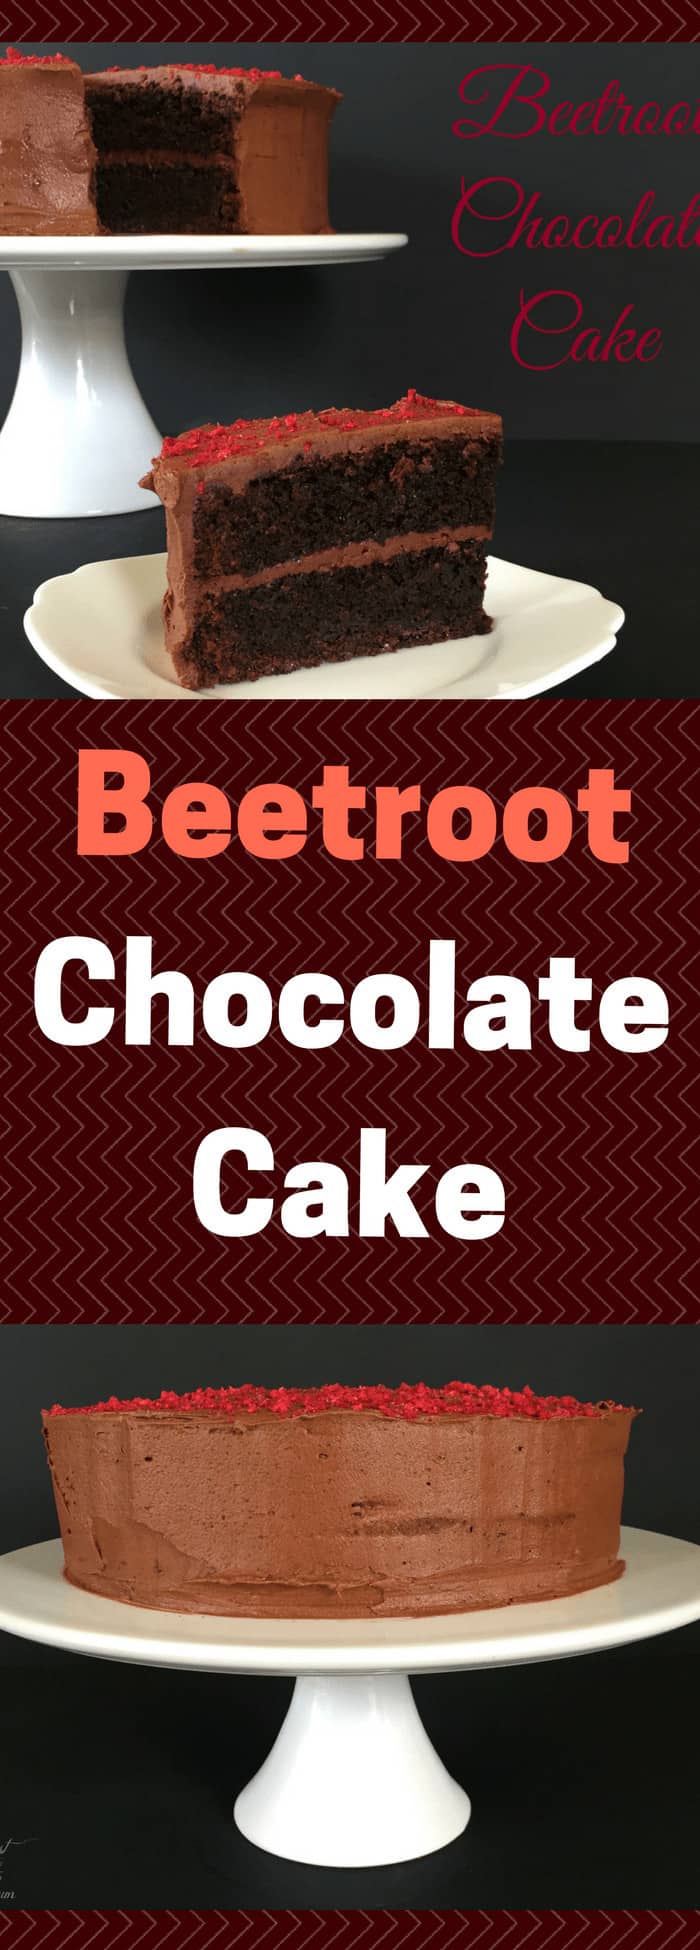 Delicious Beetroot Chocolate Cake